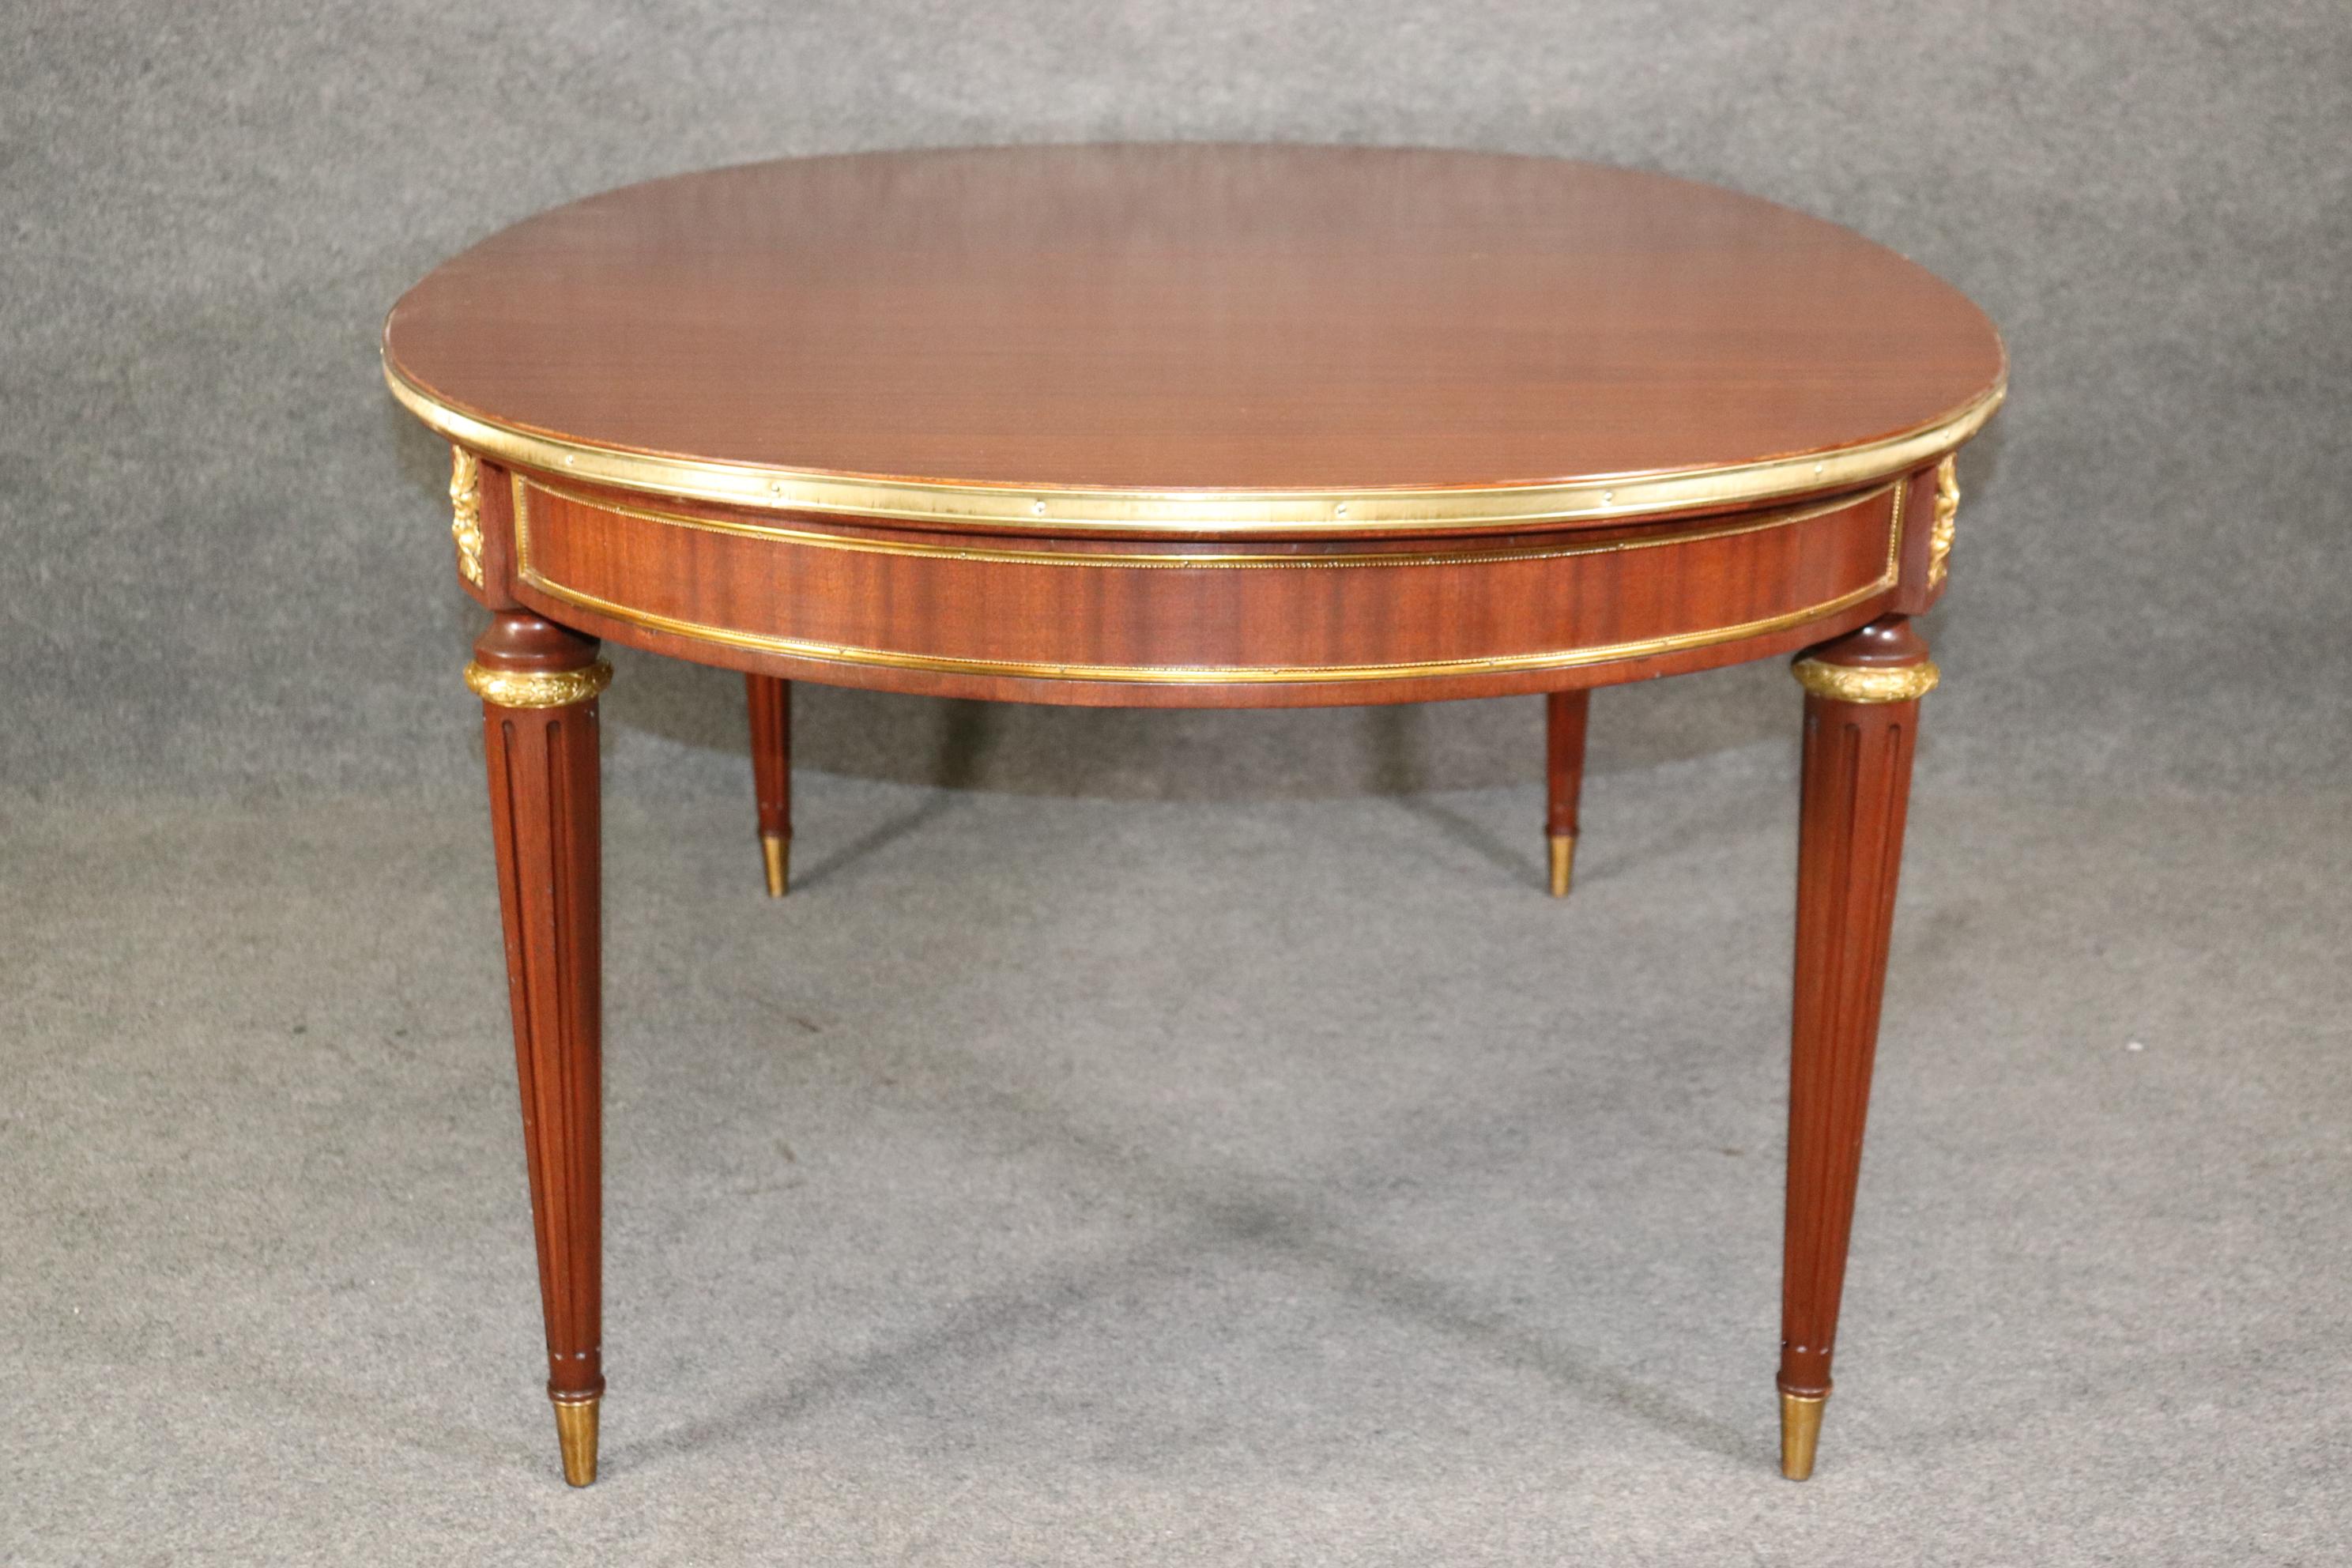 Argentine Maison Jansen Louis XVI Style Mahogany Dining Table With Two Leaves  For Sale